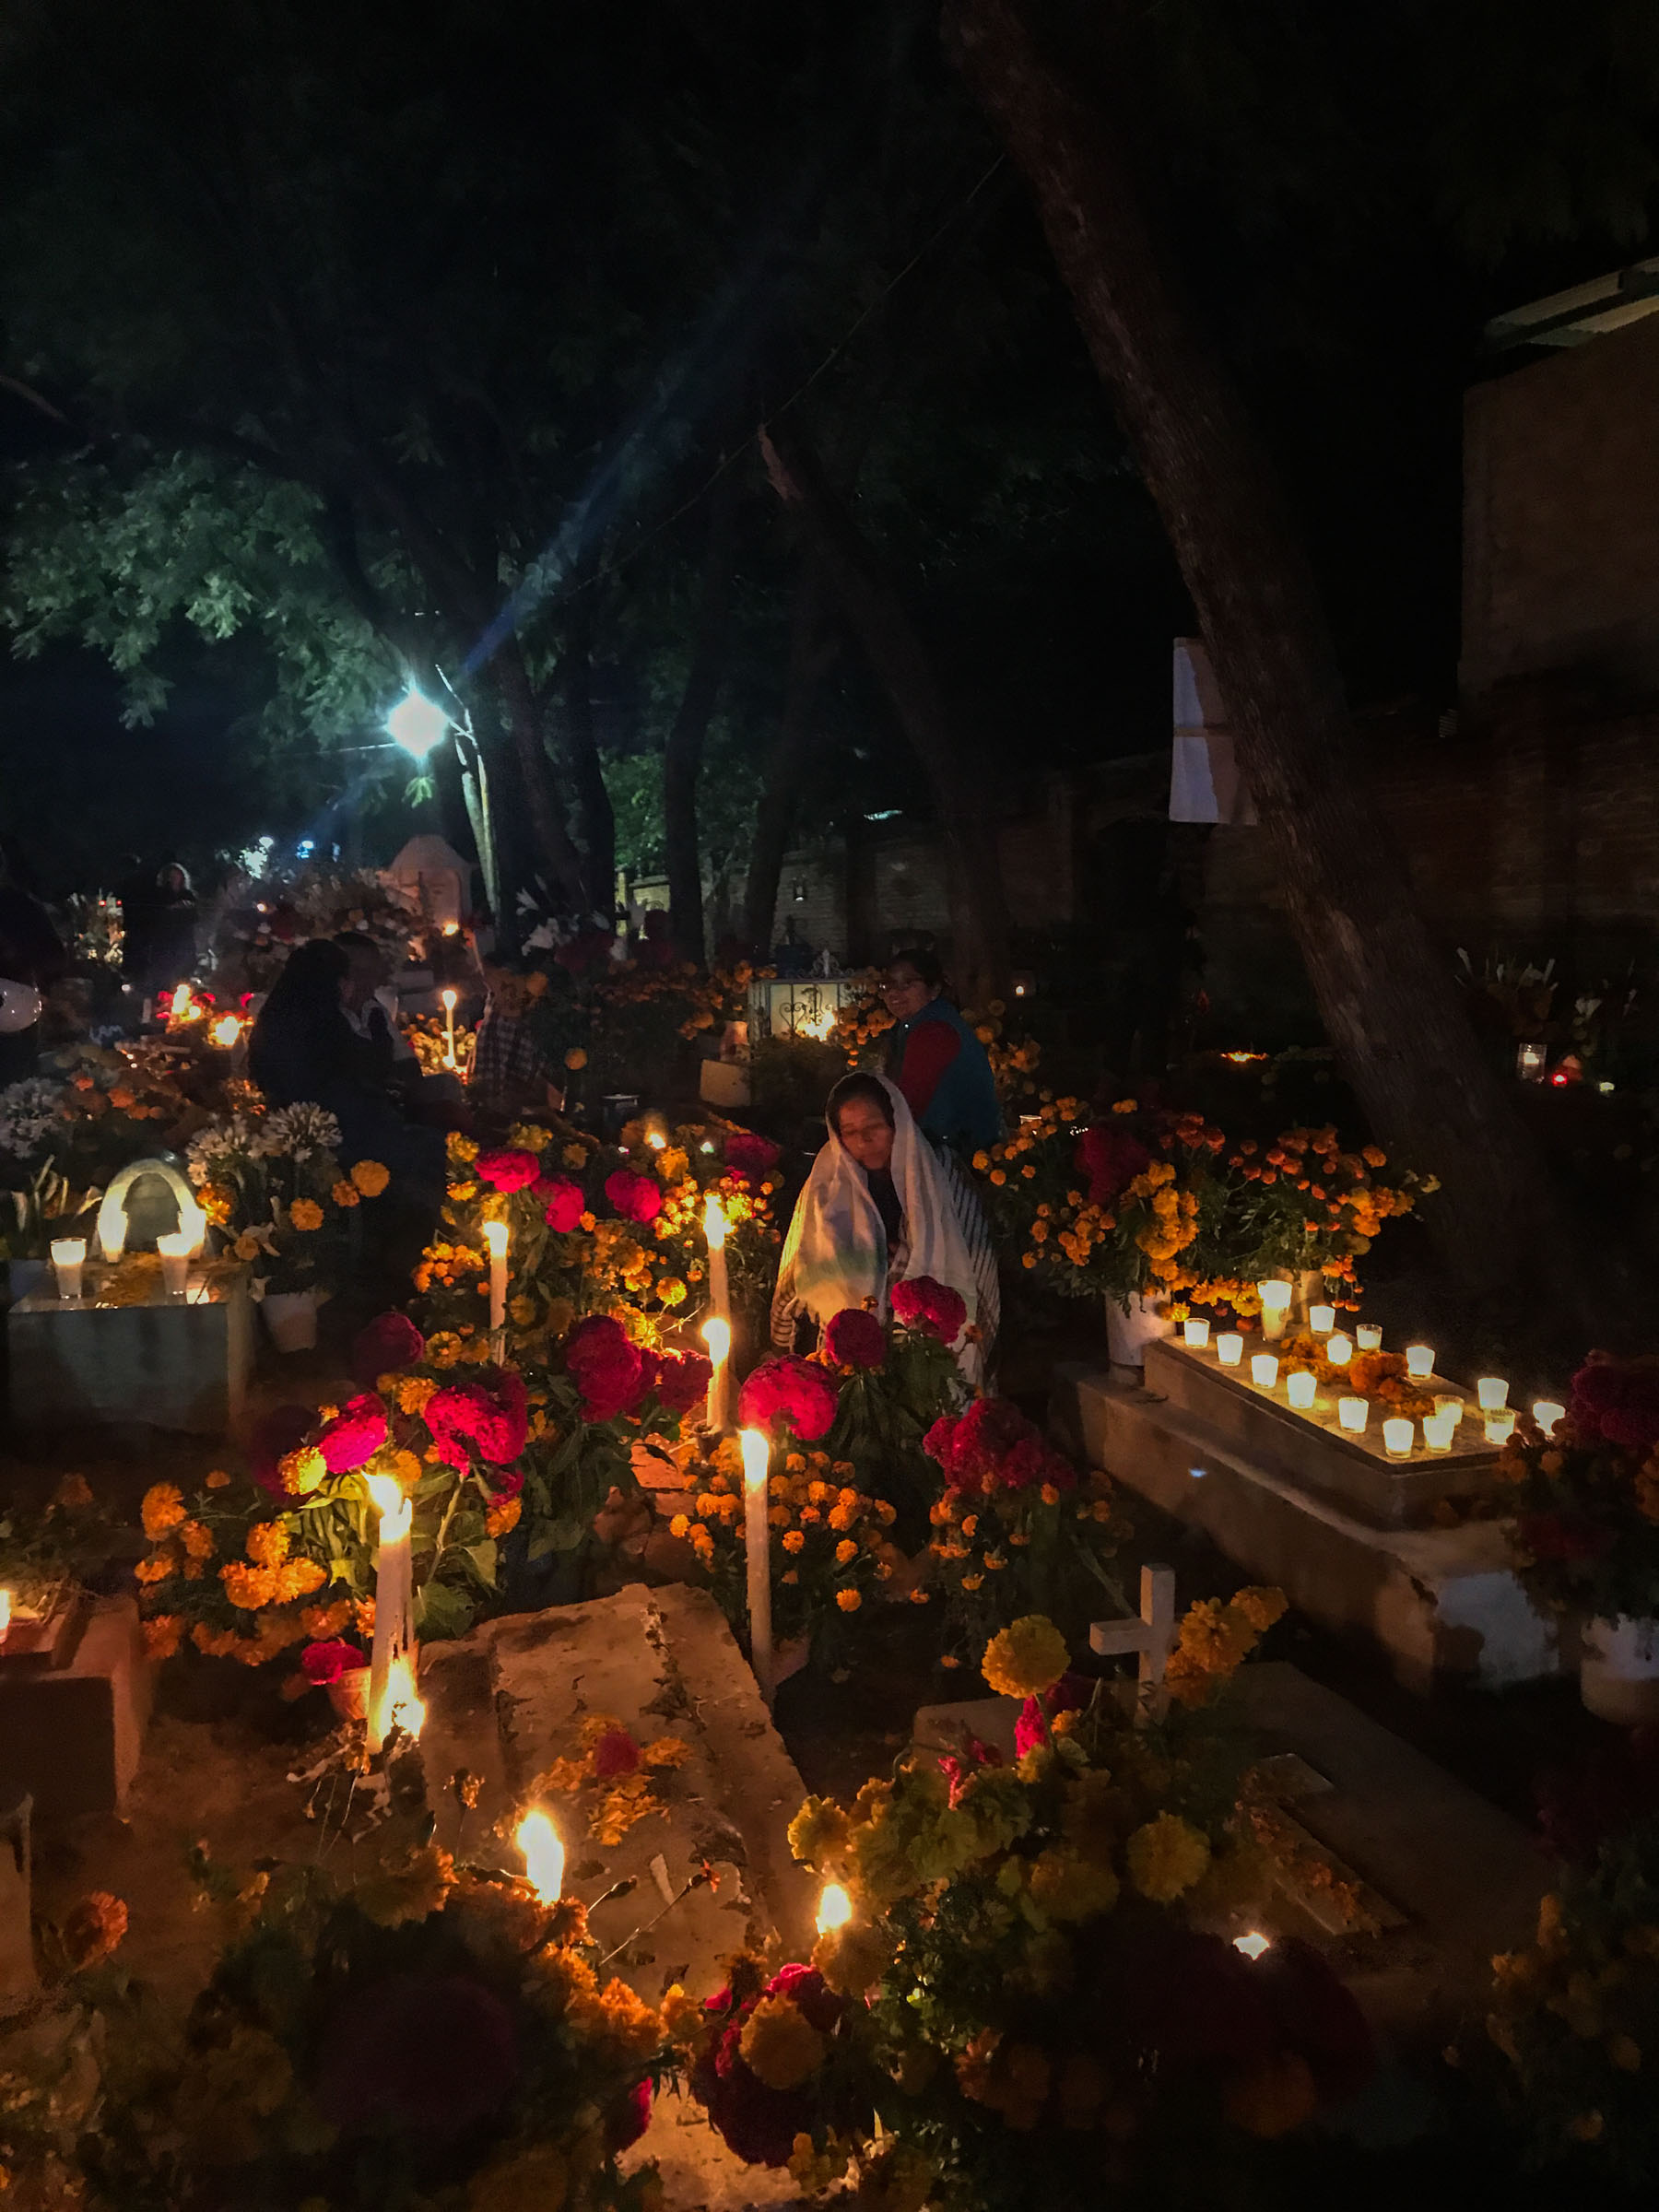 Fun Things to Experience in Mexico for Day of the Dead - Xoxocotlán Cemetery // Notjessfashion.com